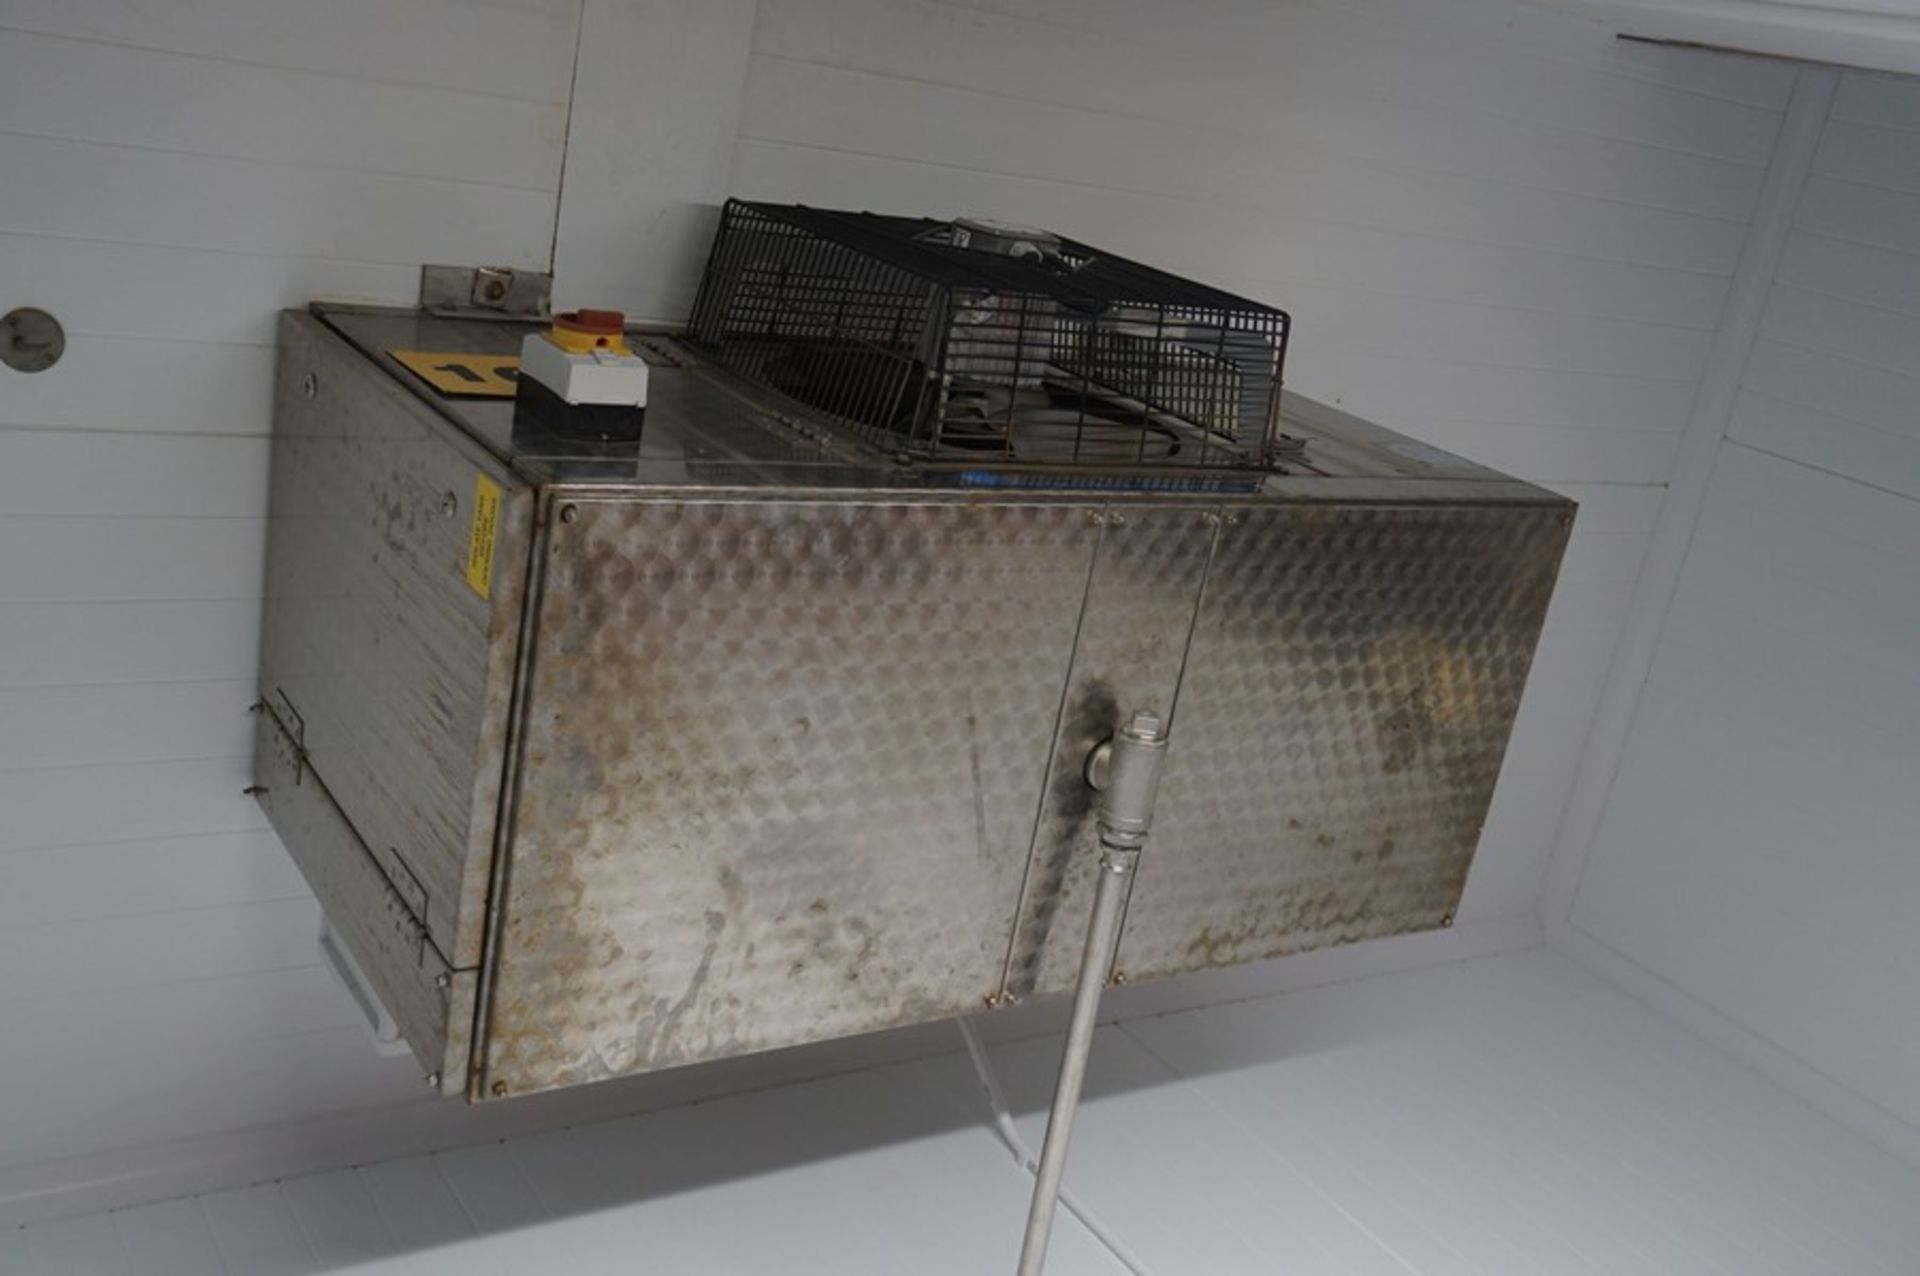 Coolers & Condensers, stainless steel single fan chiller unit (2005) Max: 100'c Min: -50'c (Lift out